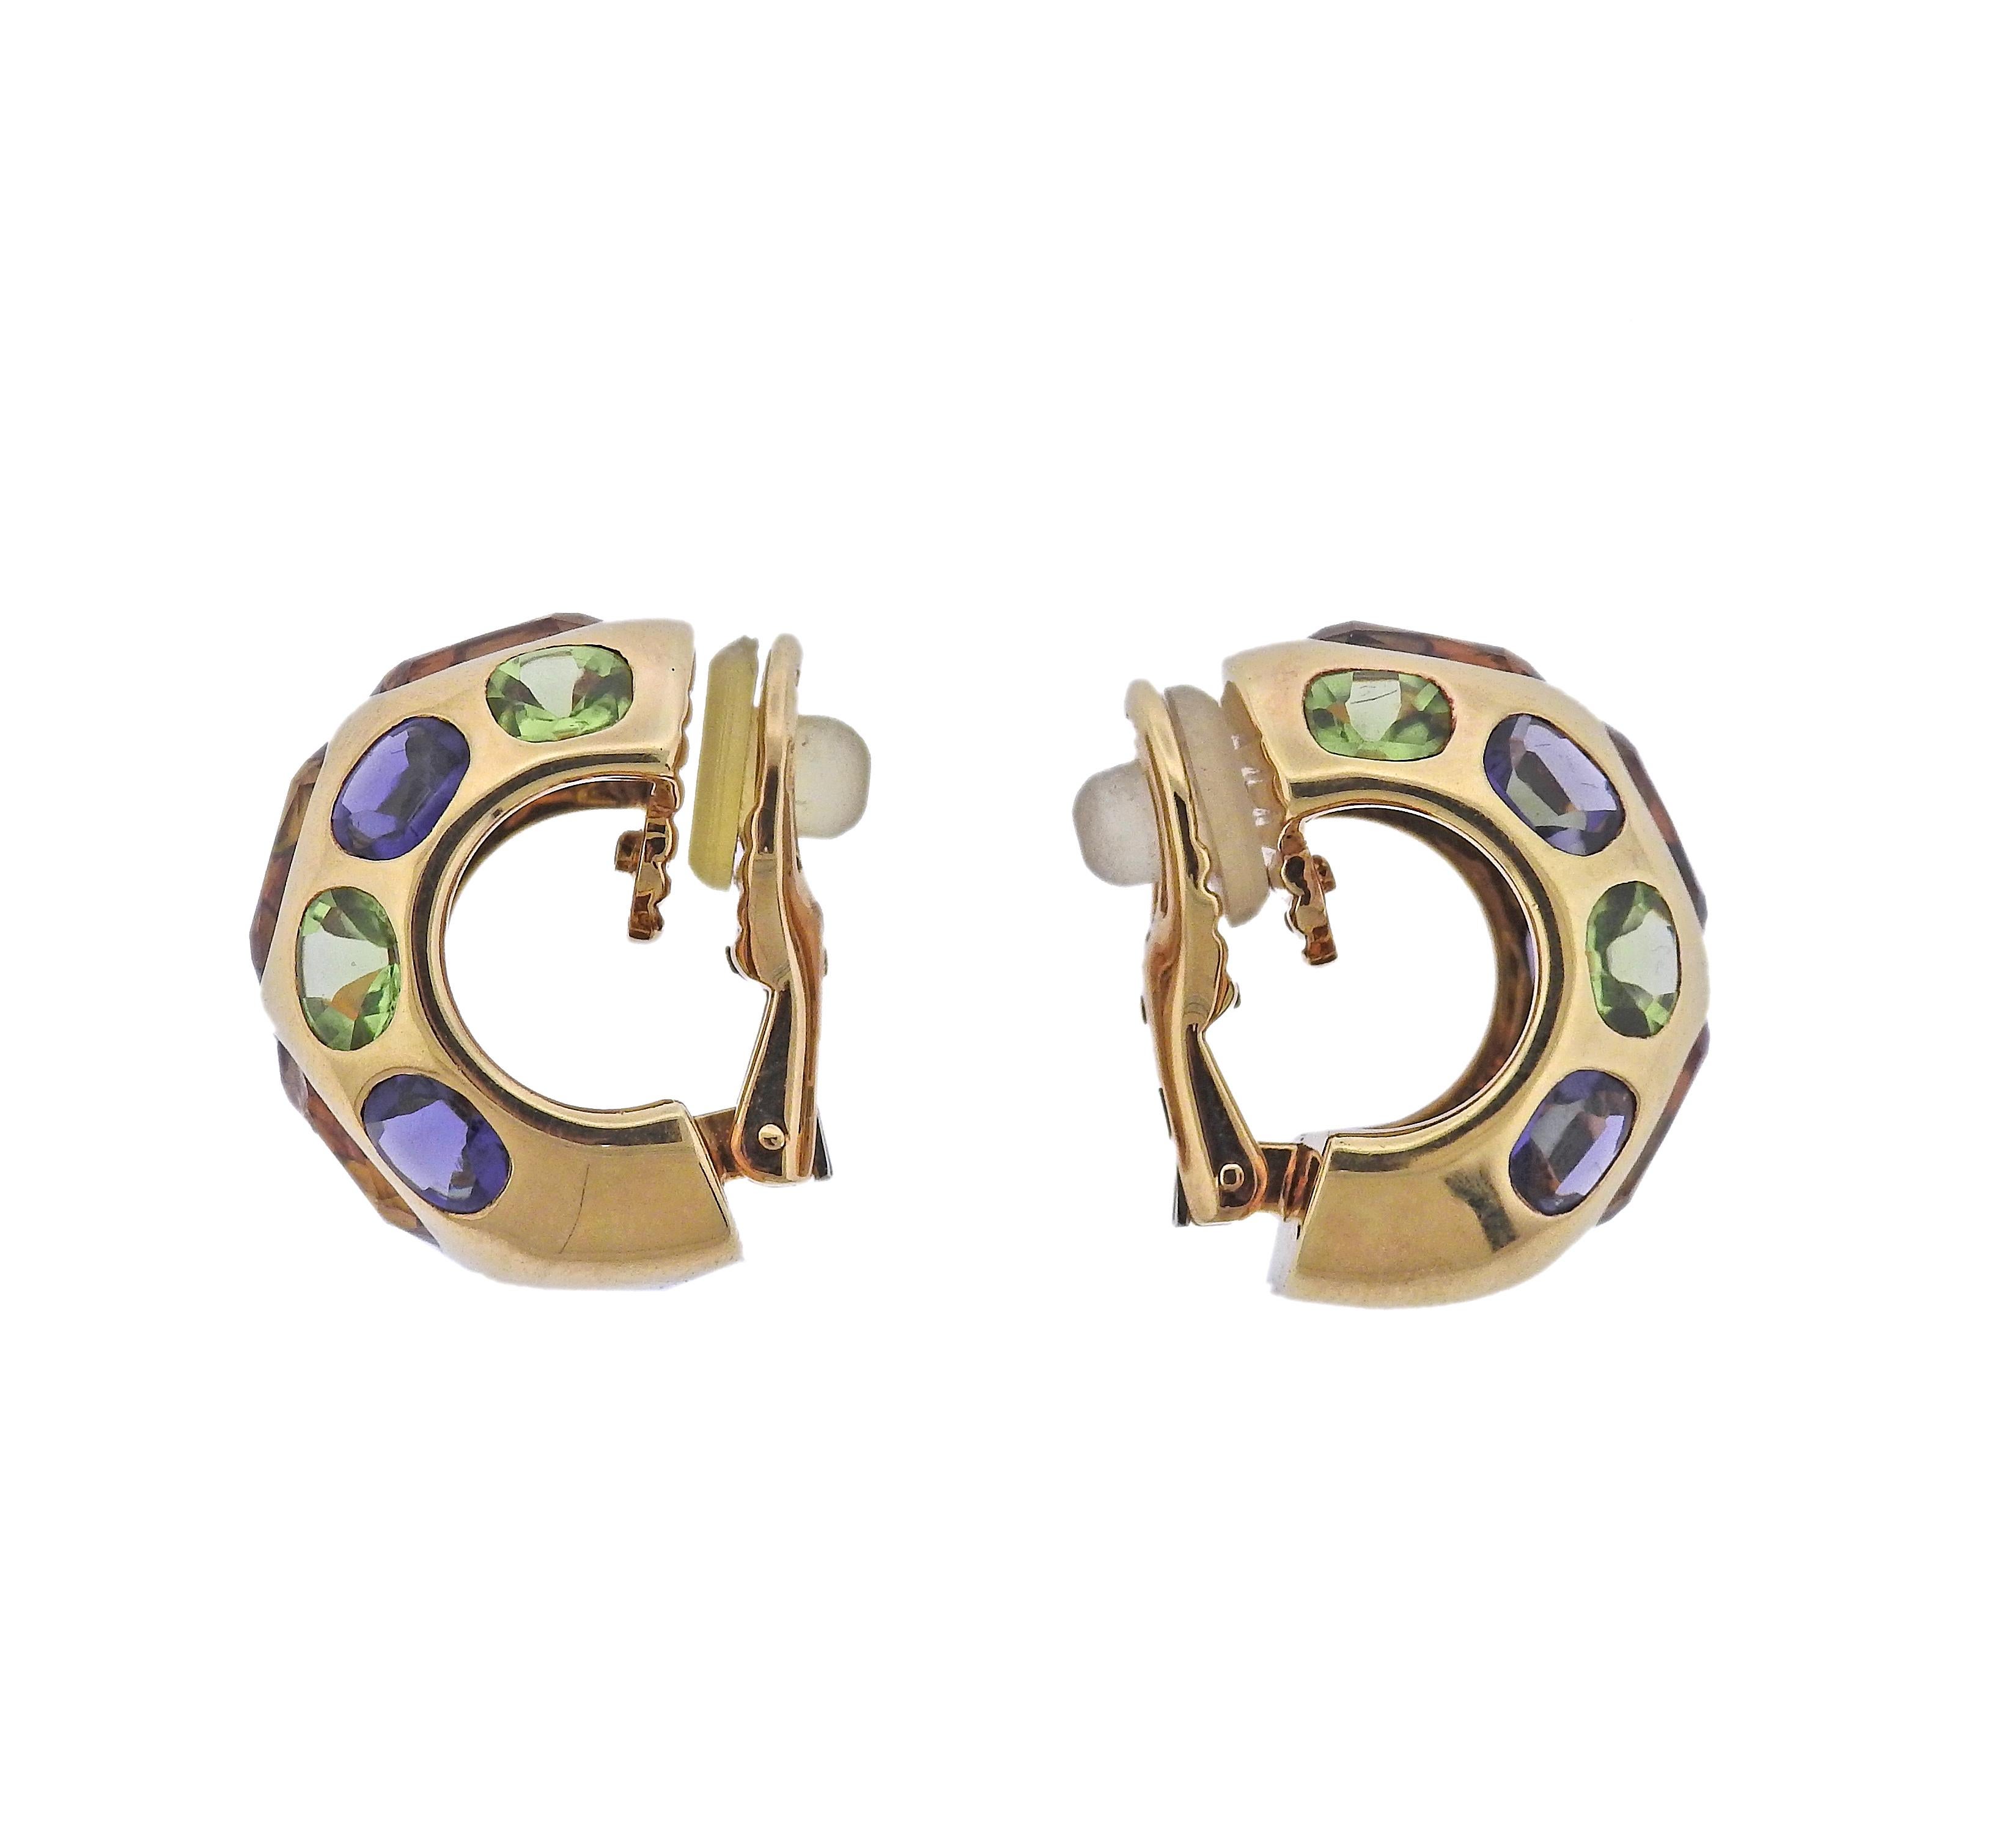 Pair of 18k gold half hoop Coco earrings by Chanel, set with citrines, peridots and iolite gemstones.  Earrings measure 21mm x 15mm. Weight - 22.7 grams. Marked: Chanel, 750, 1D6704.